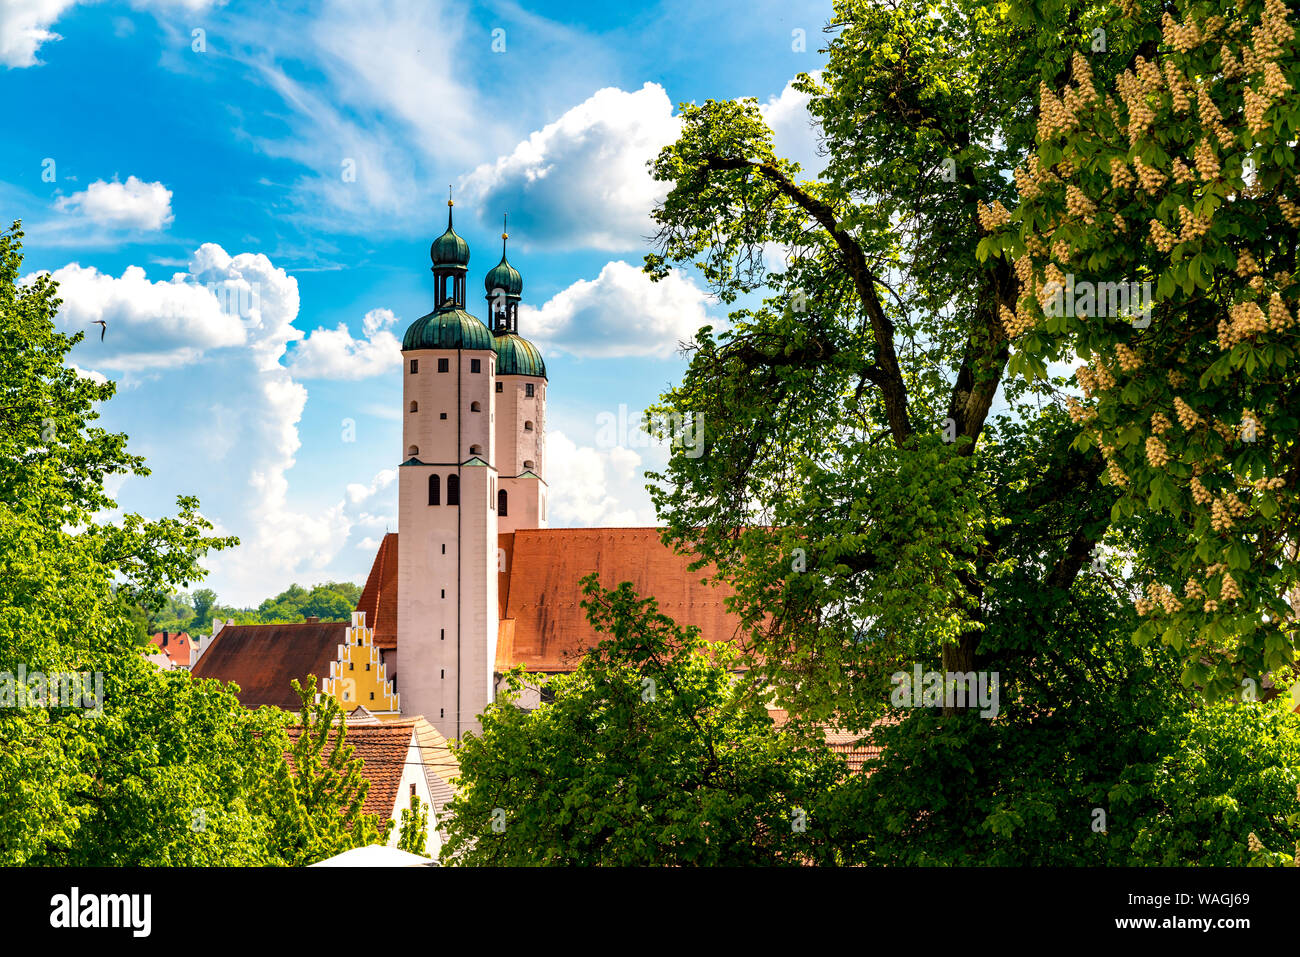 View on the Church Towers in Wemding, Germany Stock Photo - Alamy